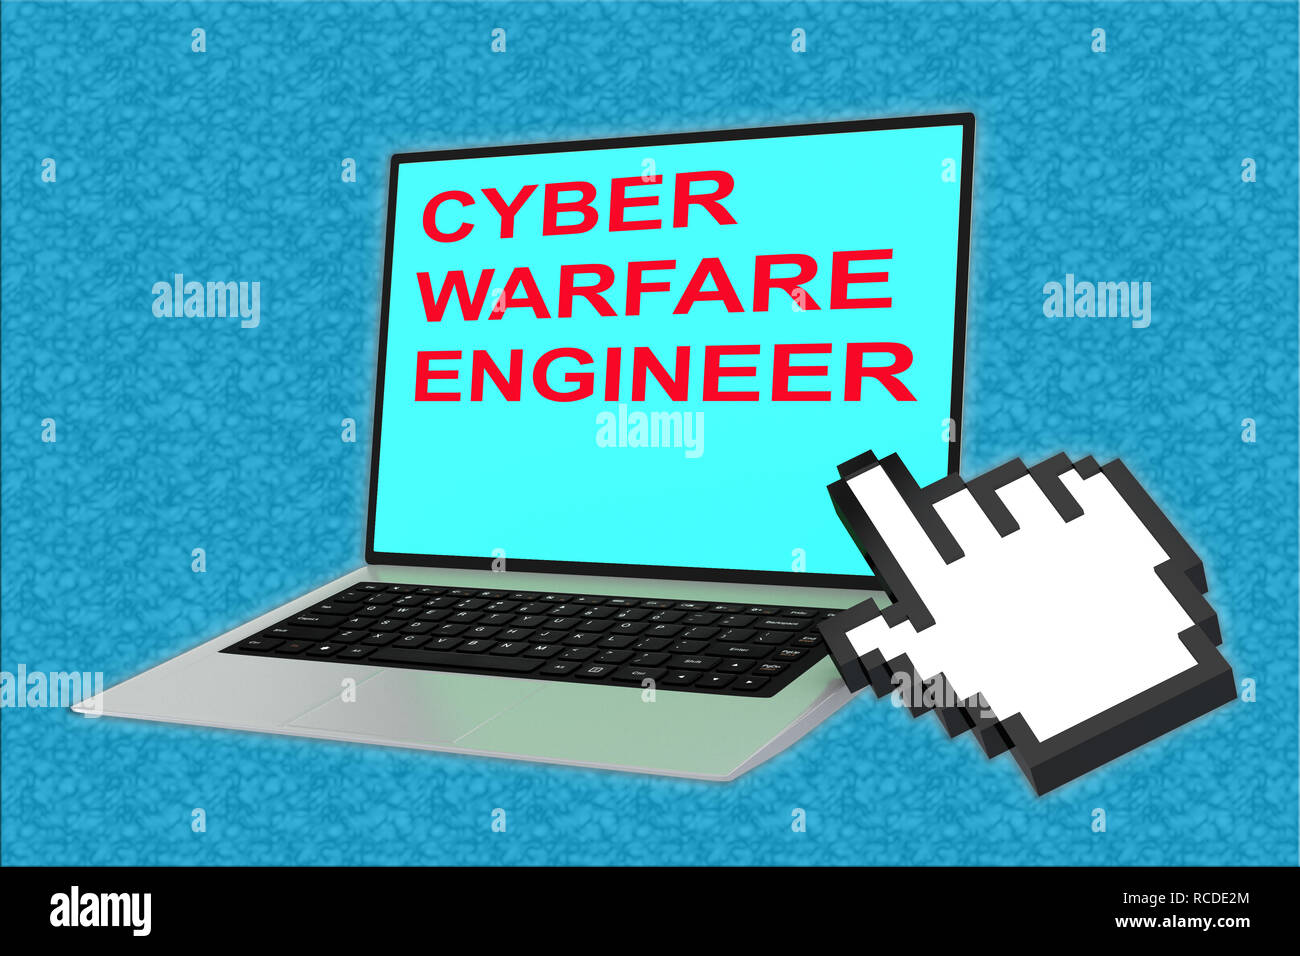 3D illustration of CYBER WARFARE ENGINEER script with pointing hand icon pointing at the laptop screen Stock Photo